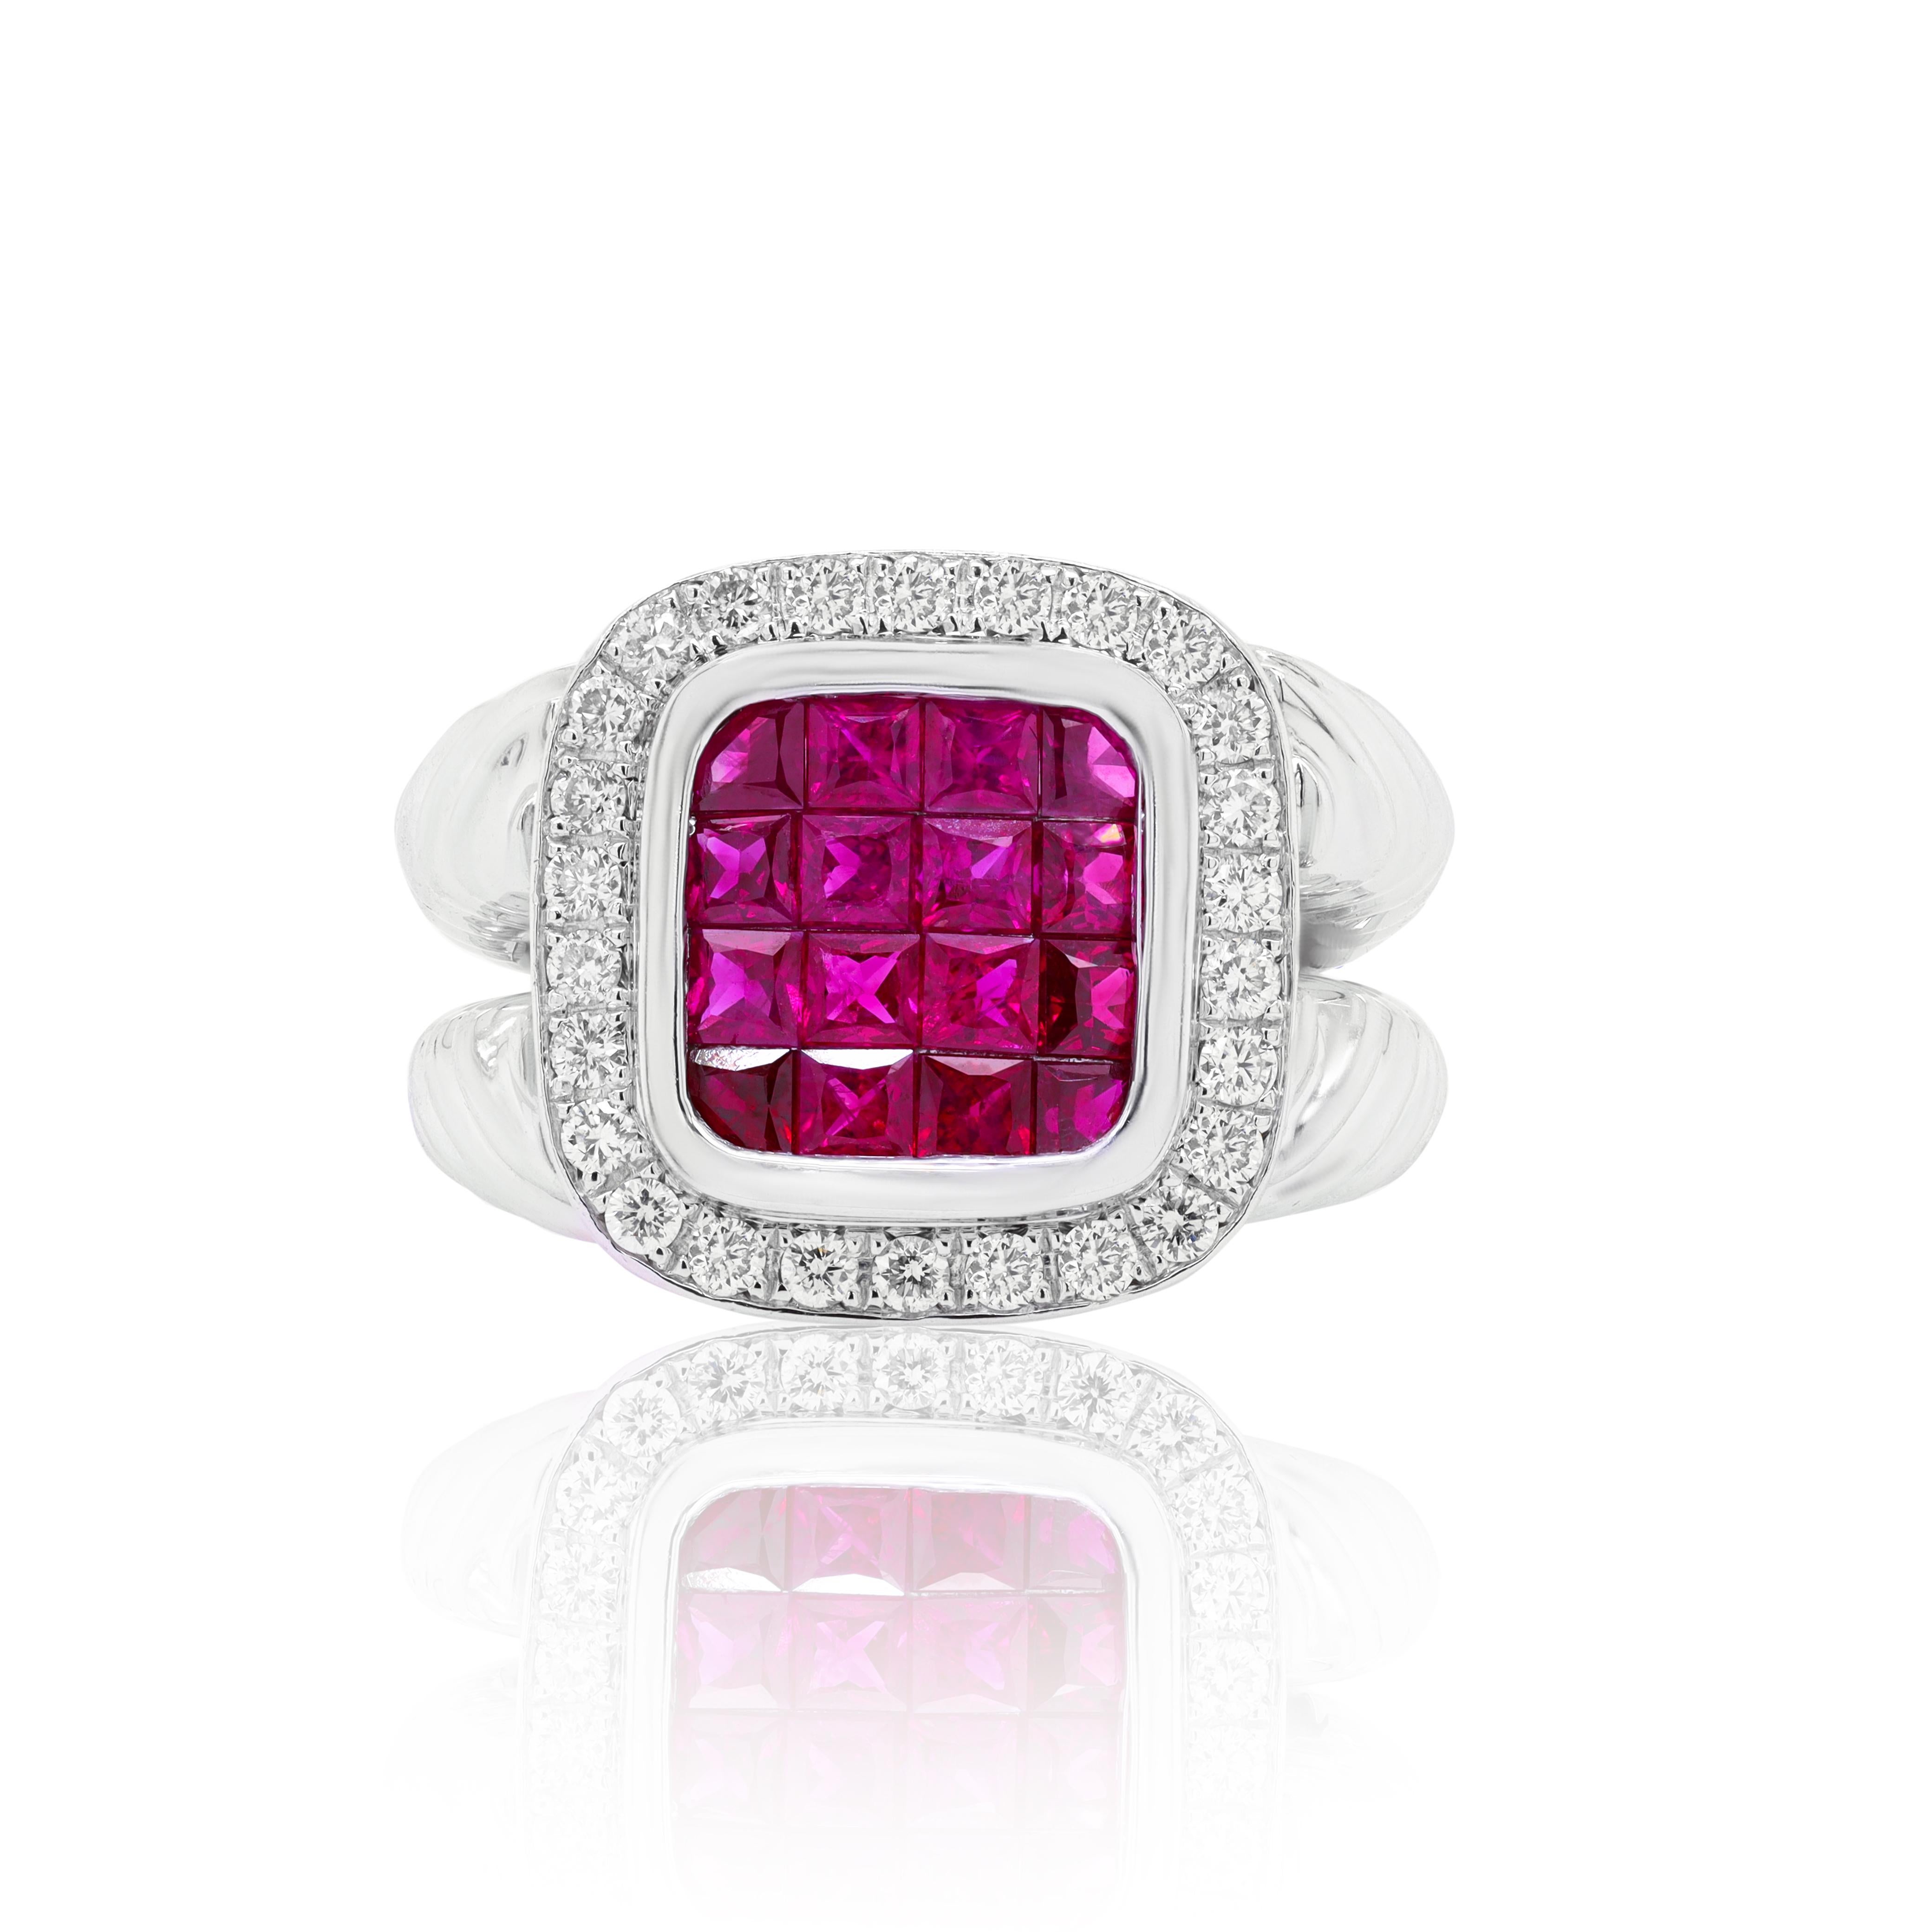 18 kt white gold ruby diamond fashion ring featuring  2.40 cts tw of rubies surrounded by 1.00 cts tw of diamonds.
Diana M. is a leading supplier of top-quality fine jewelry for over 35 years.
Diana M is one-stop shop for all your jewelry shopping,